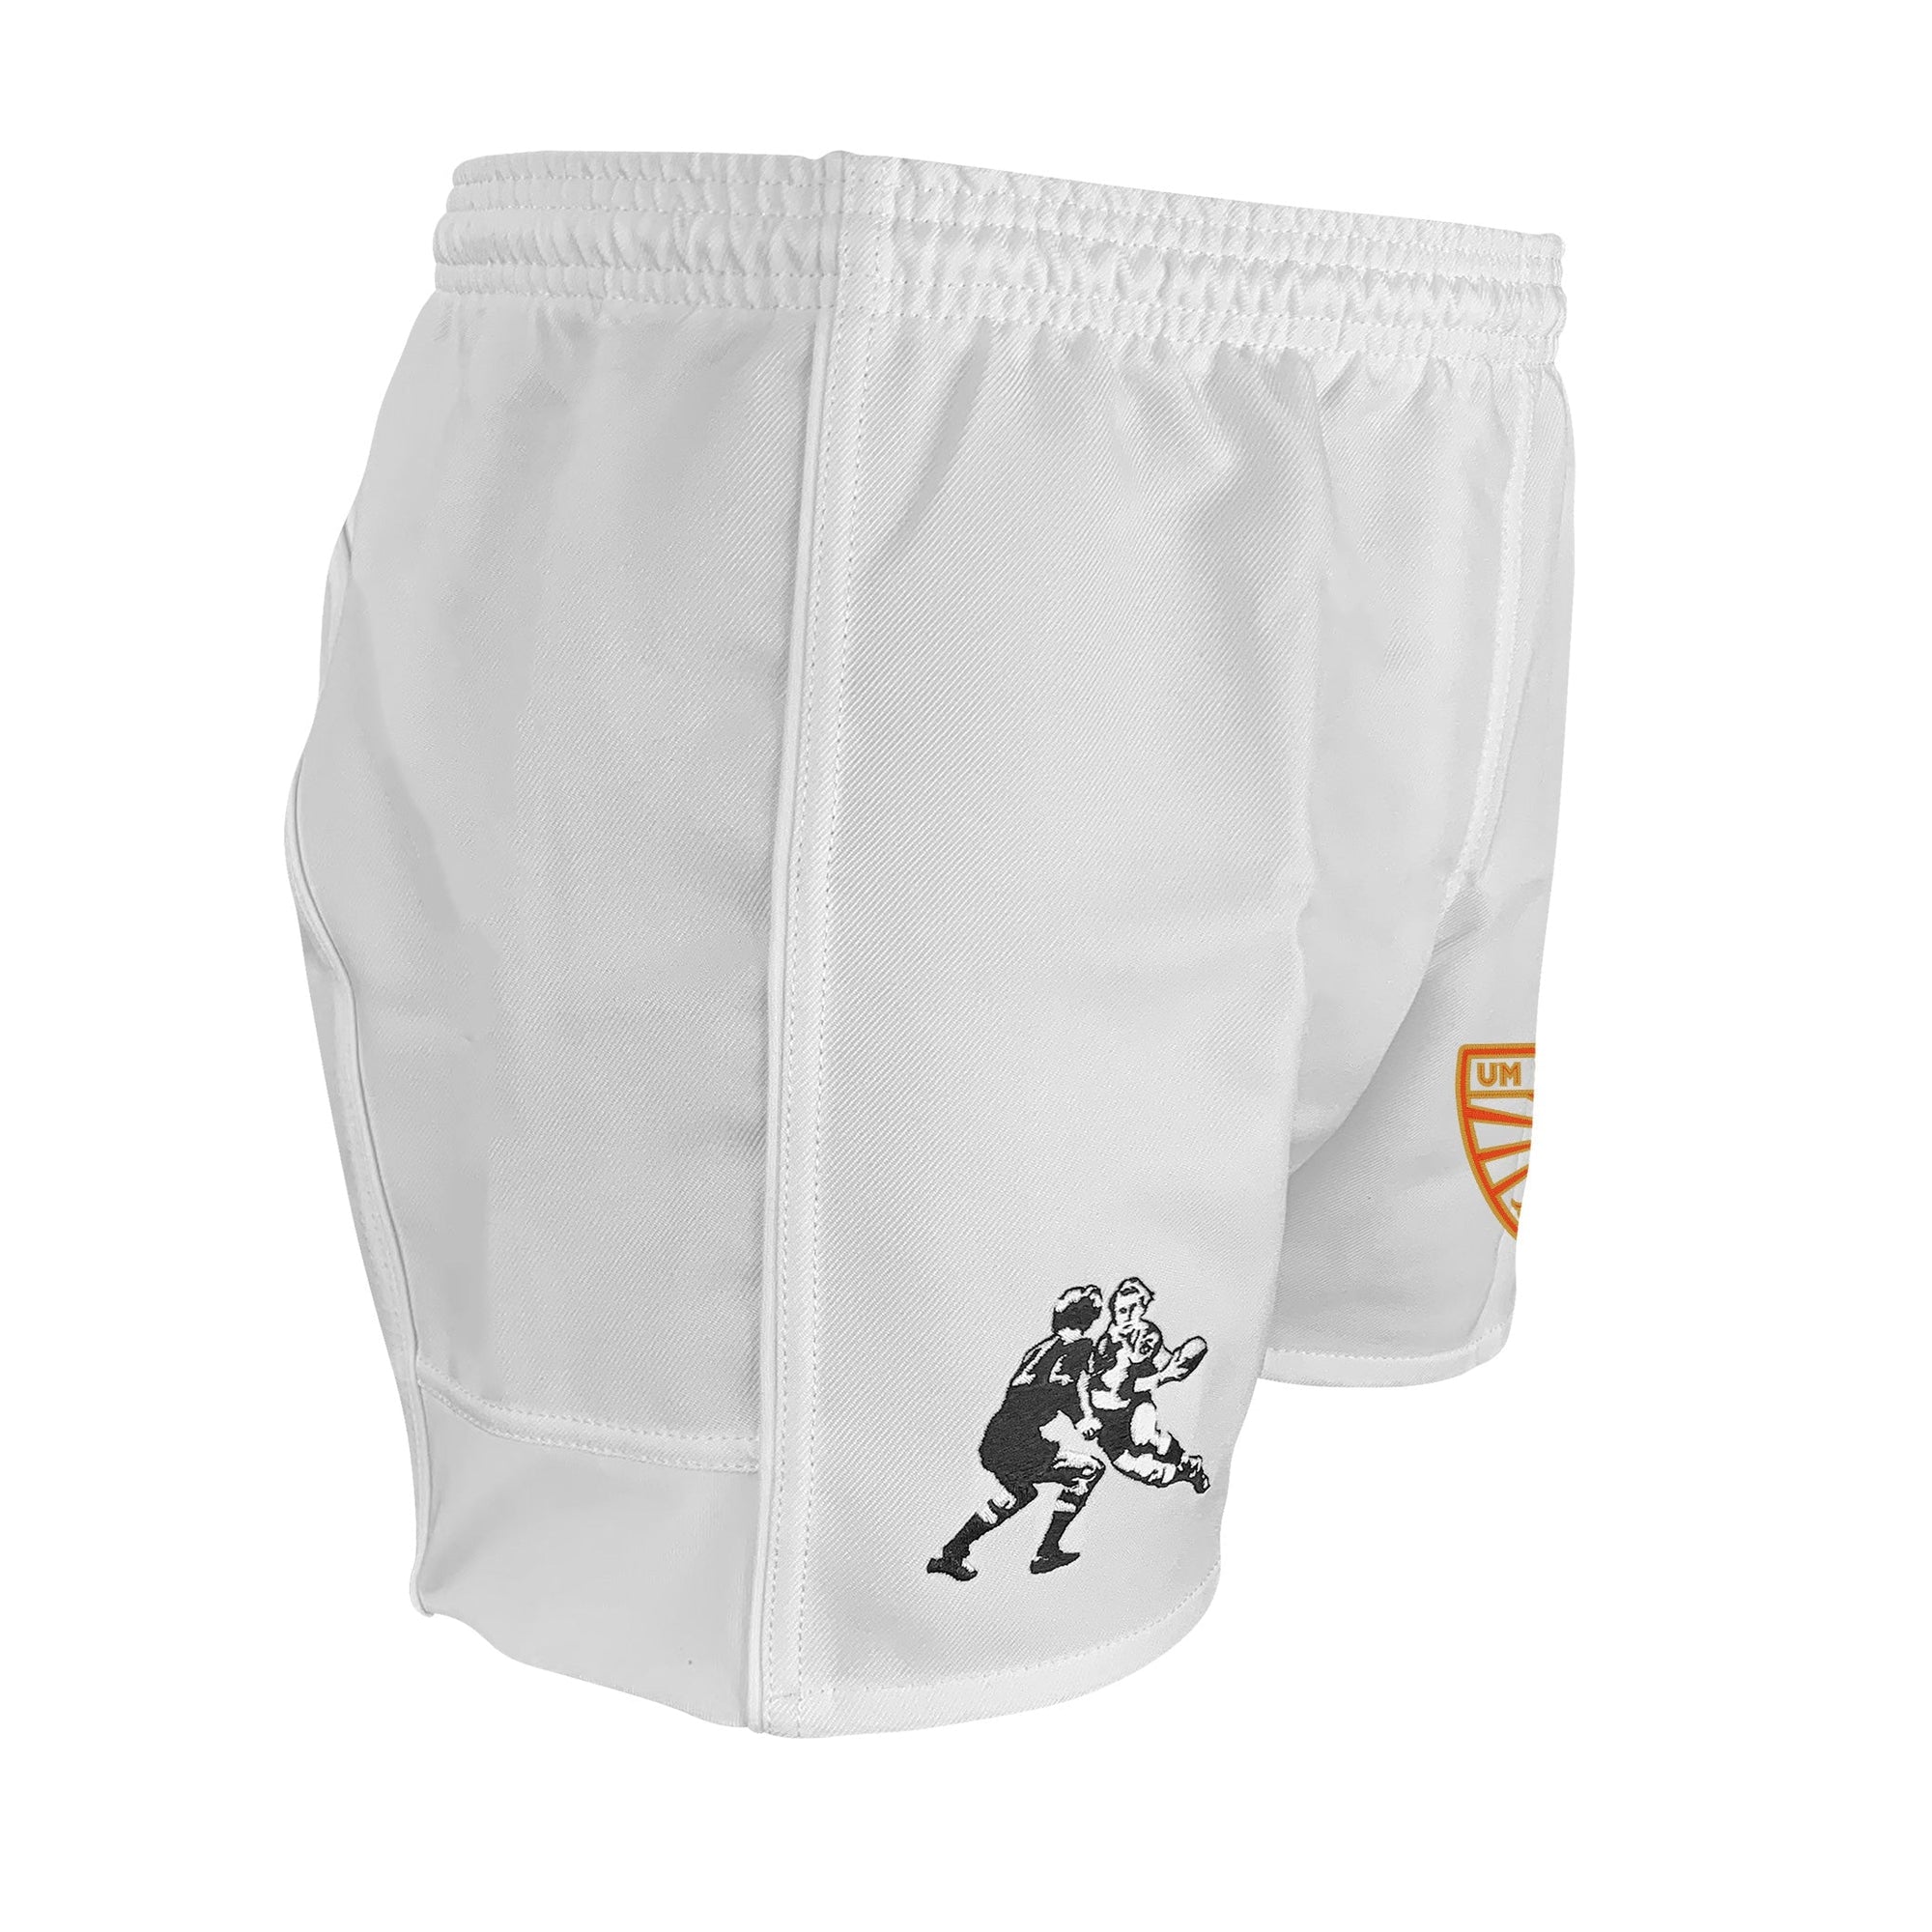 Rugby Imports UMiami Rugby RI Pro Power Shorts